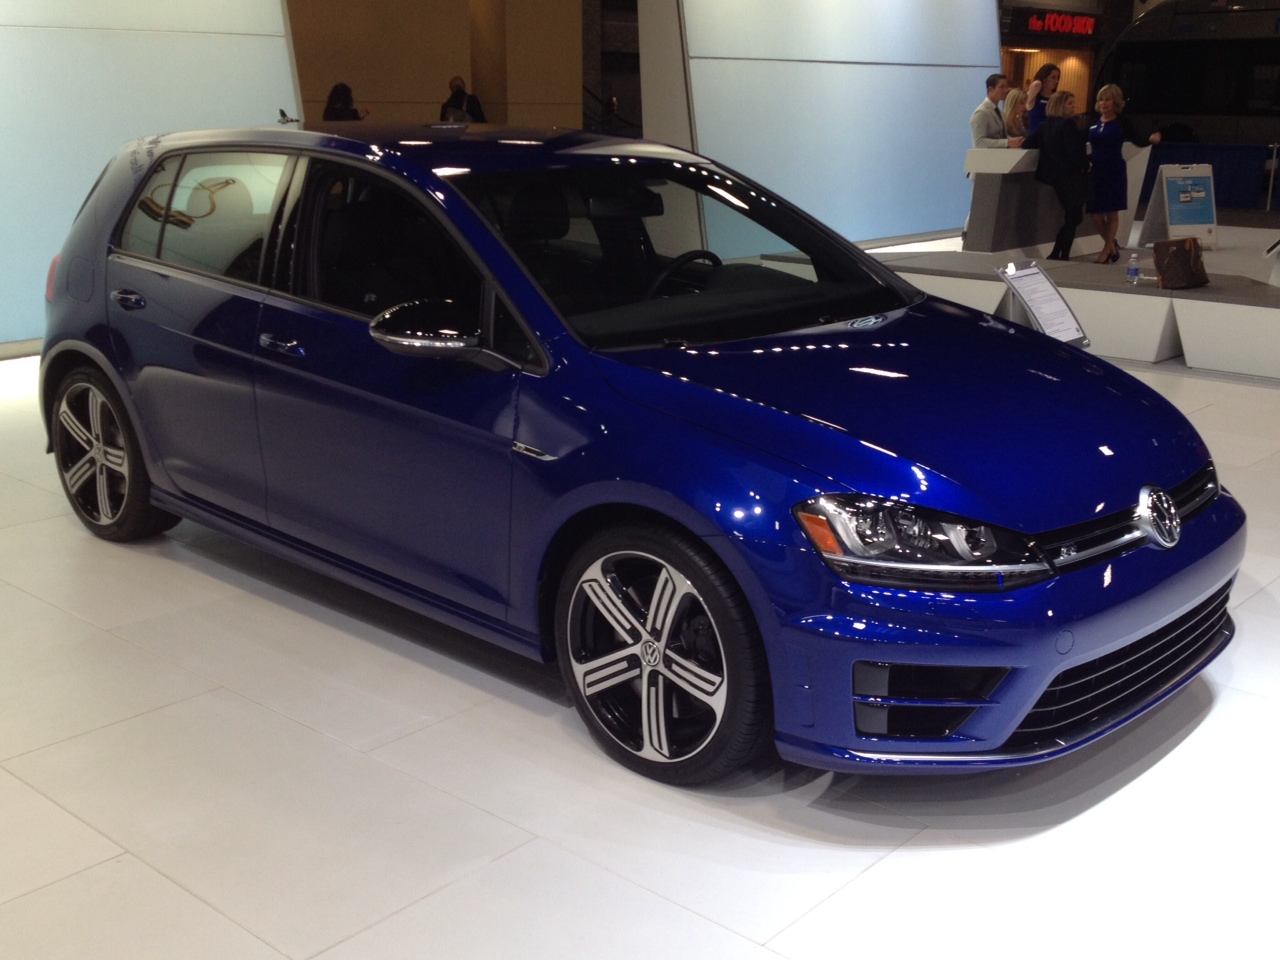 The top Volkswagen Golf R starts at around $37,000 but features all wheel drive and nearly 300 horsepower. (WTOP/John Aaron)